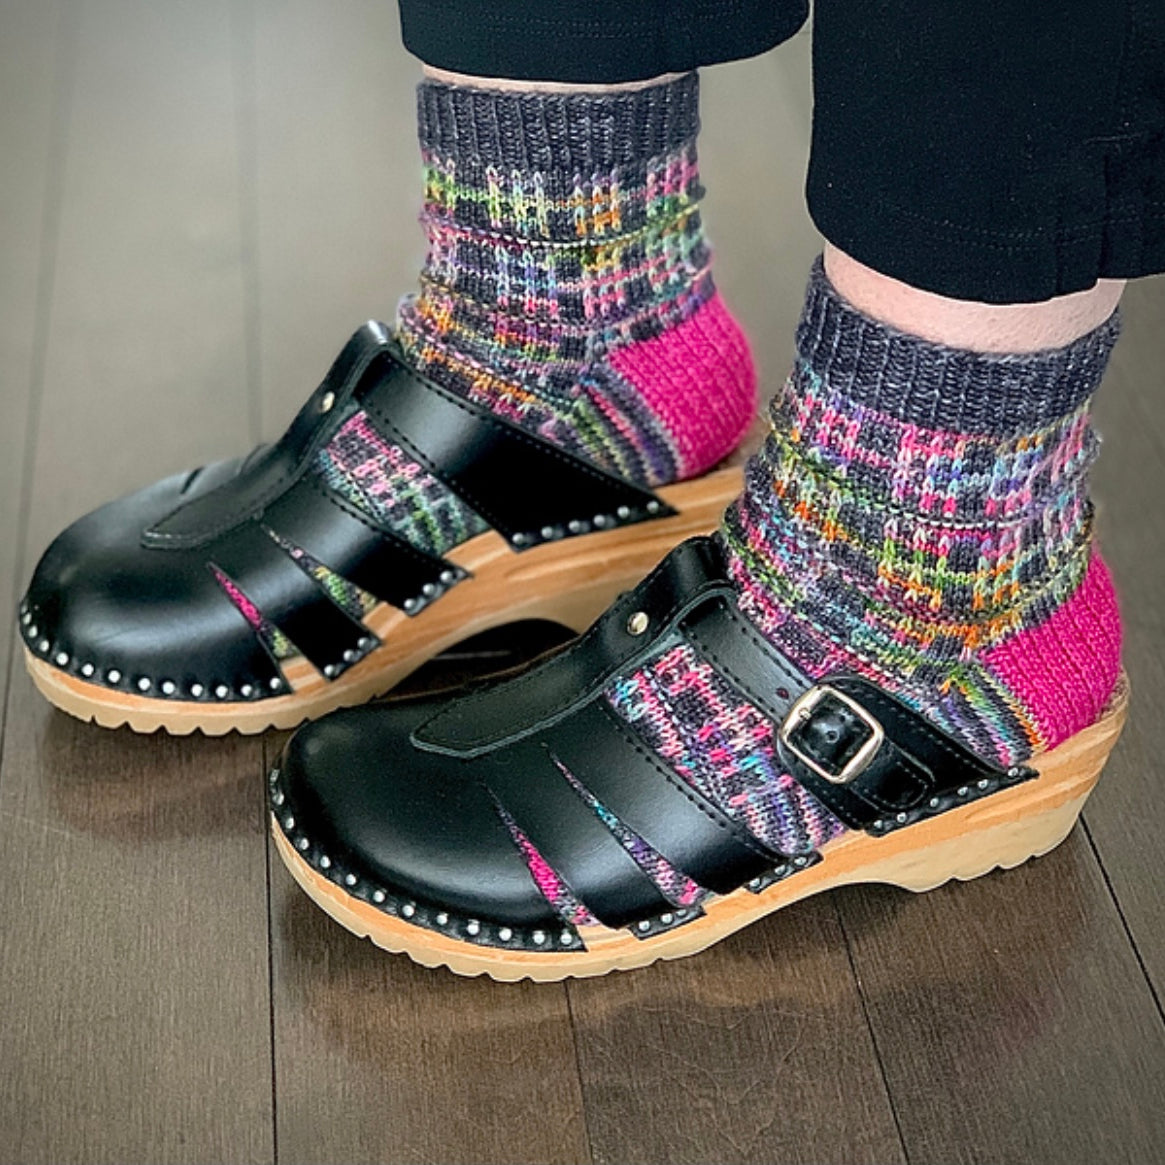 woman wearing clogs and hand knit socks